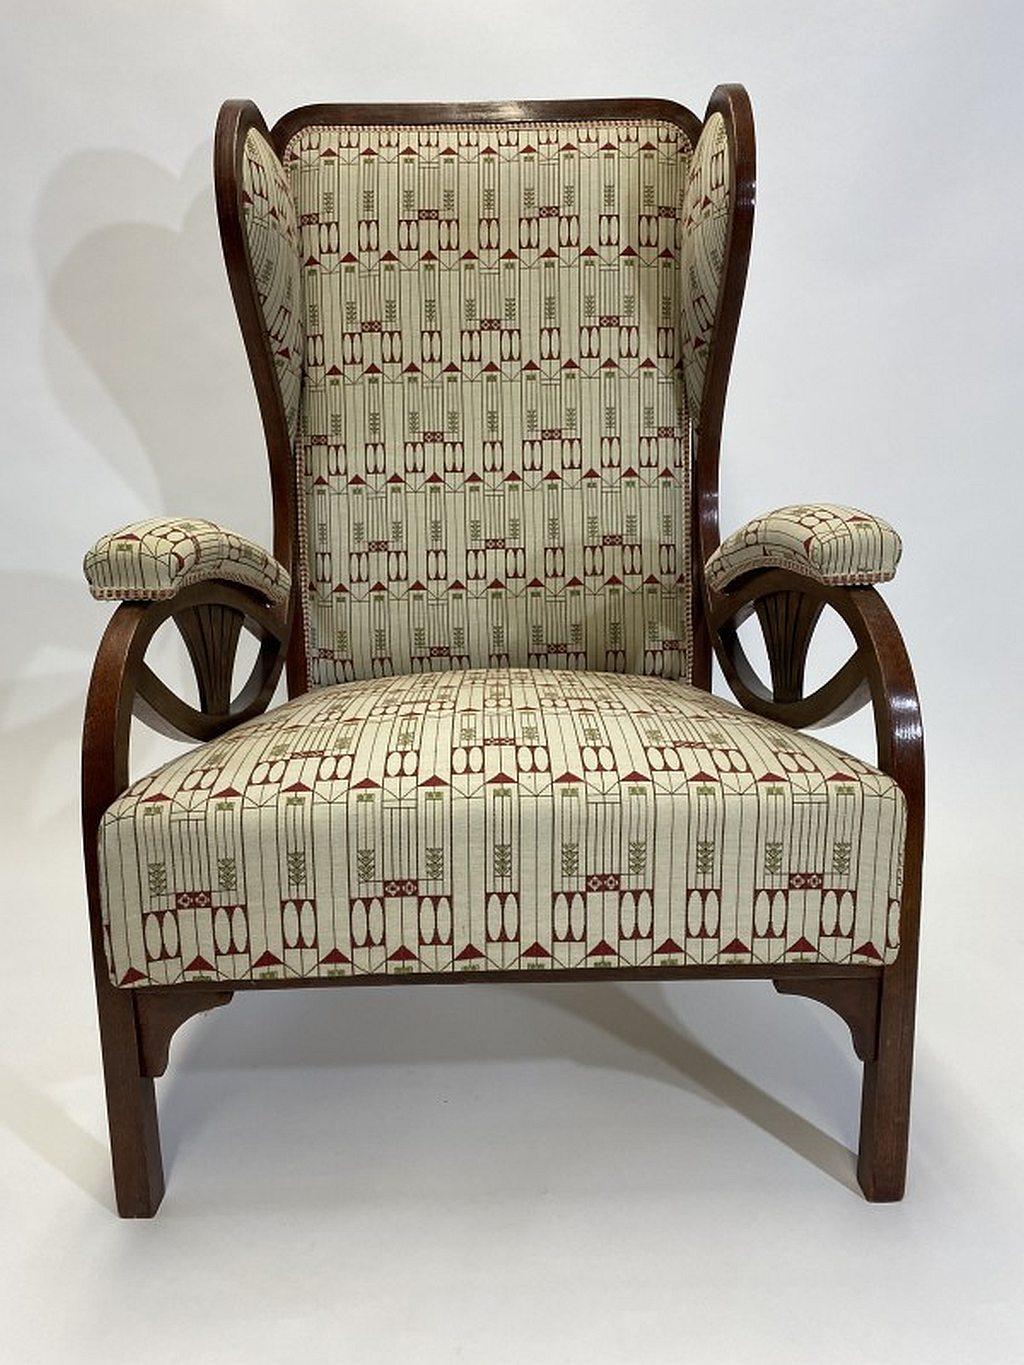 Art nouveau wing chair no.6542 by Thonet in excellent condition, backhausen fabric.